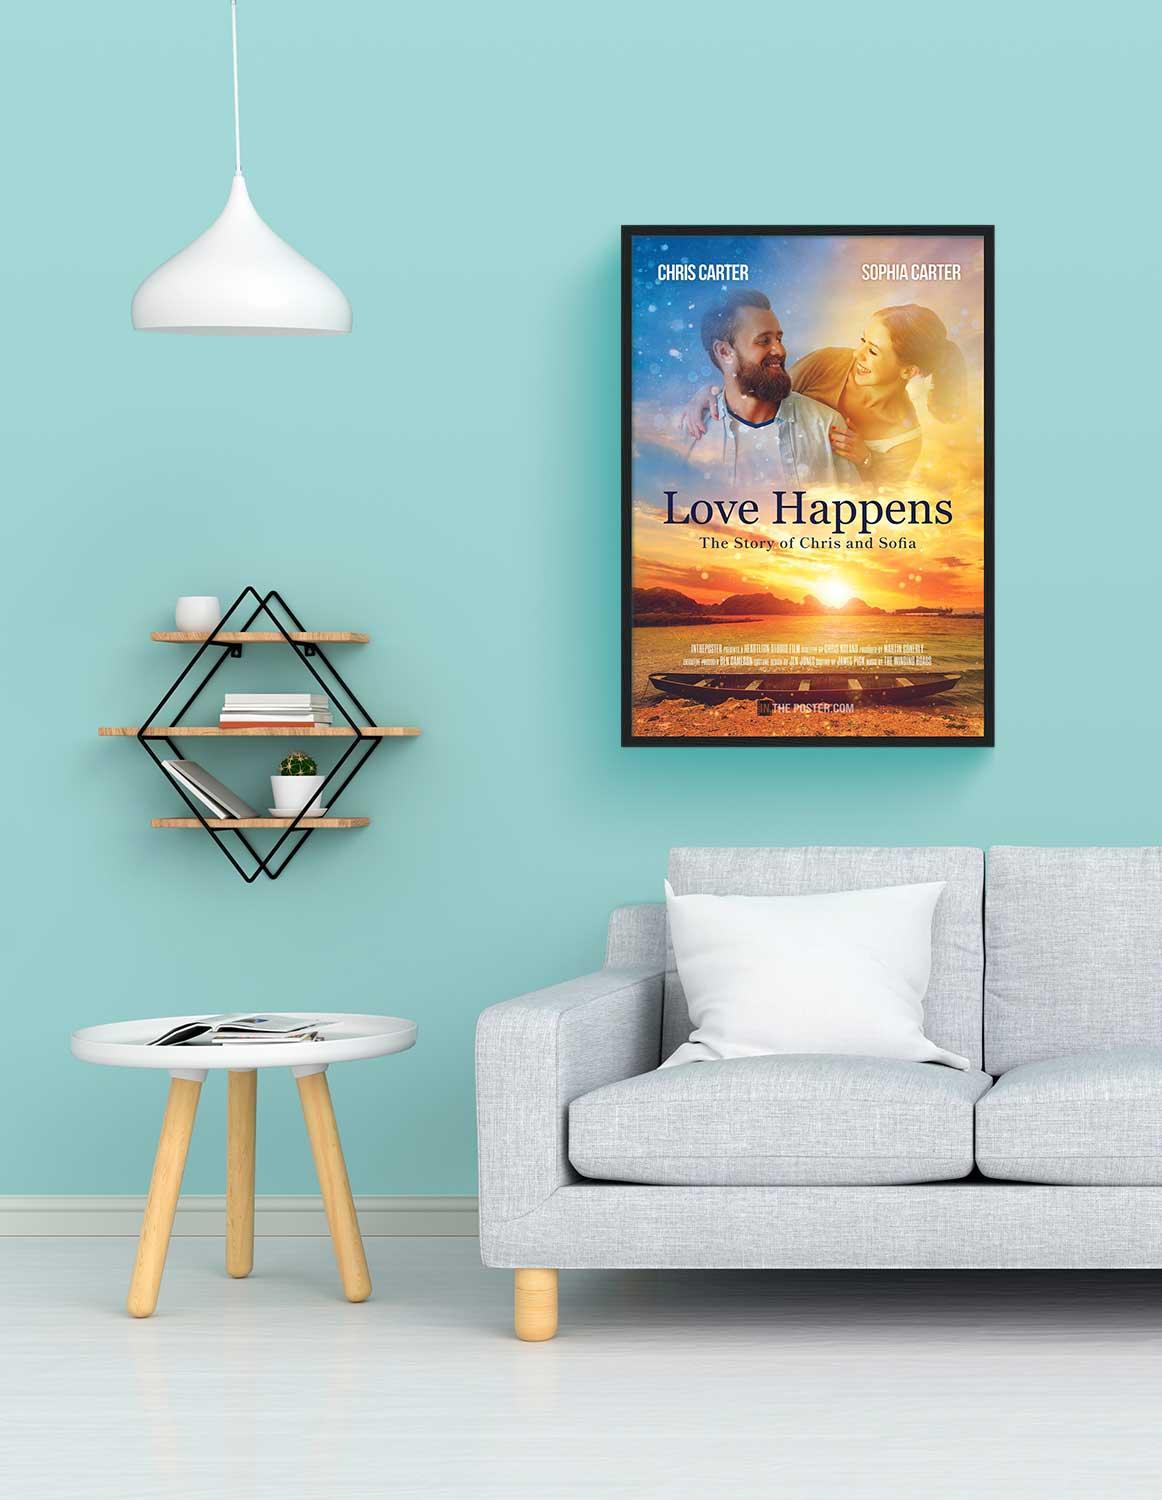 A romantic movie poster in a regular size black frame above a grey sofa